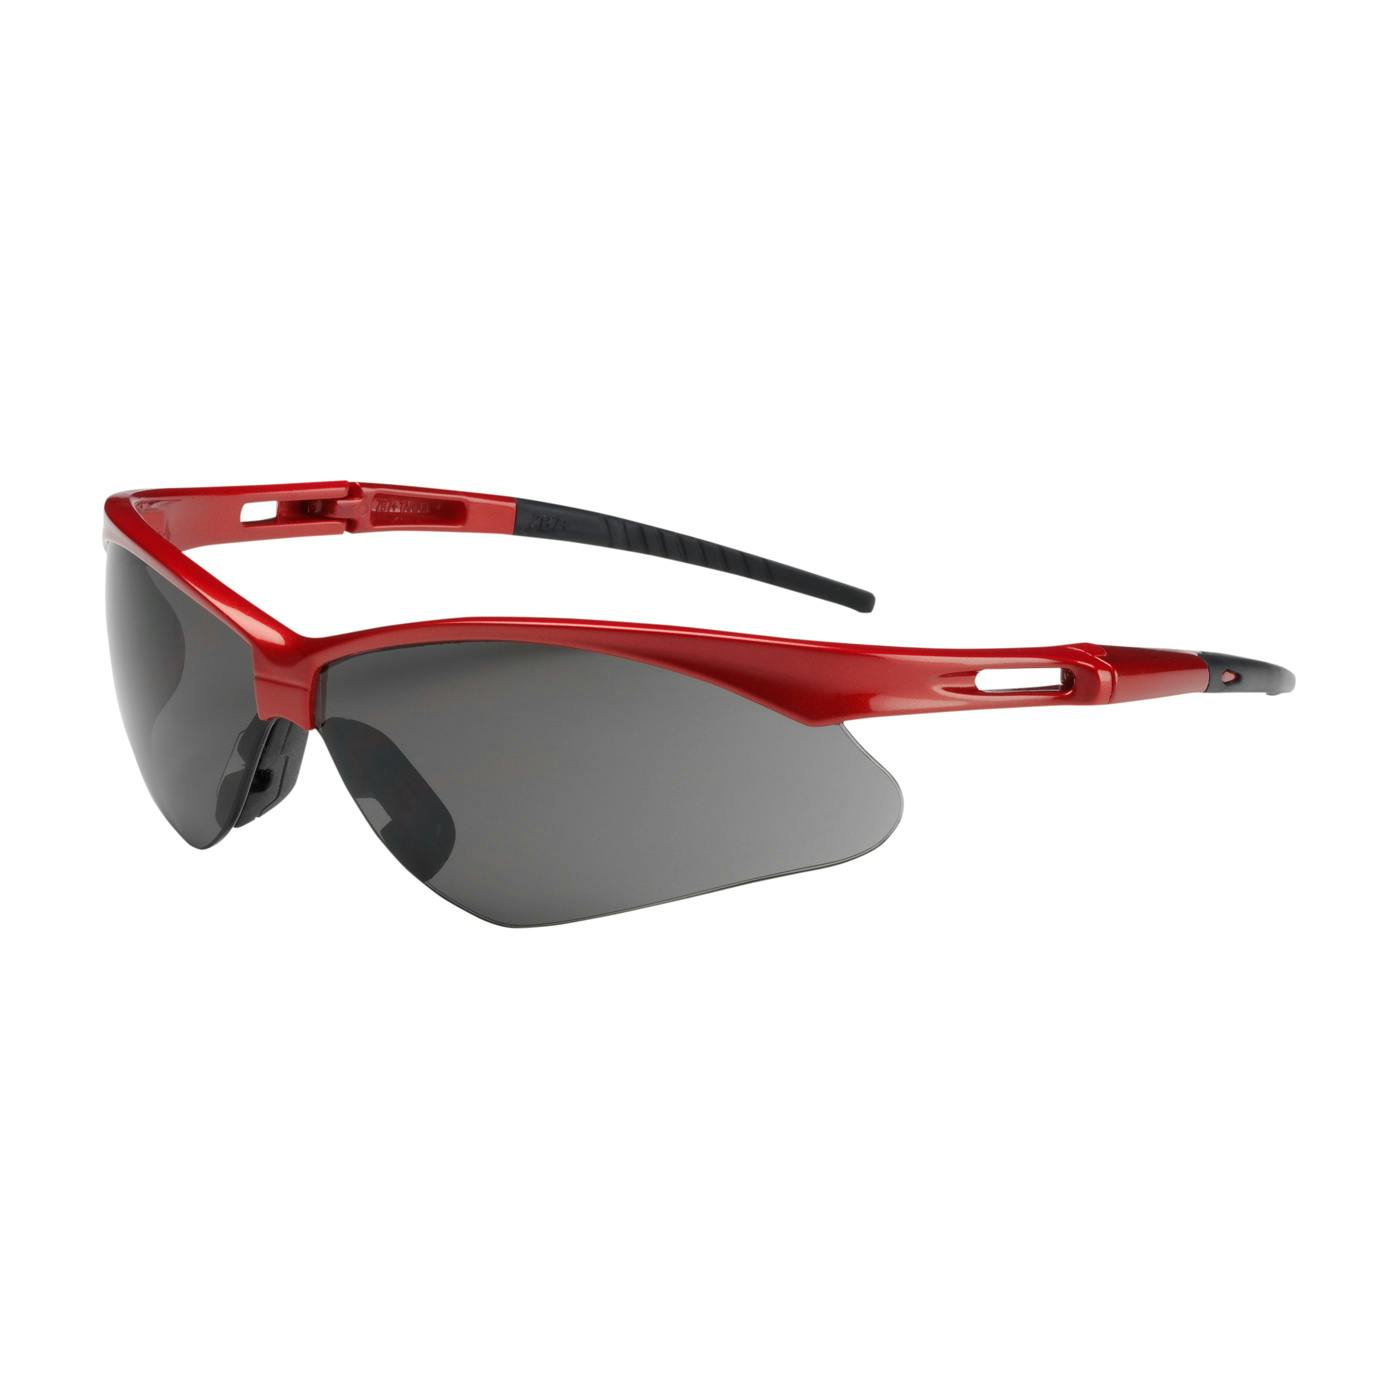 Semi-Rimless Safety Glasses with Red Frame, Gray Lens and Anti-Scratch Coating, Red (250-AN-10117) - OS_0